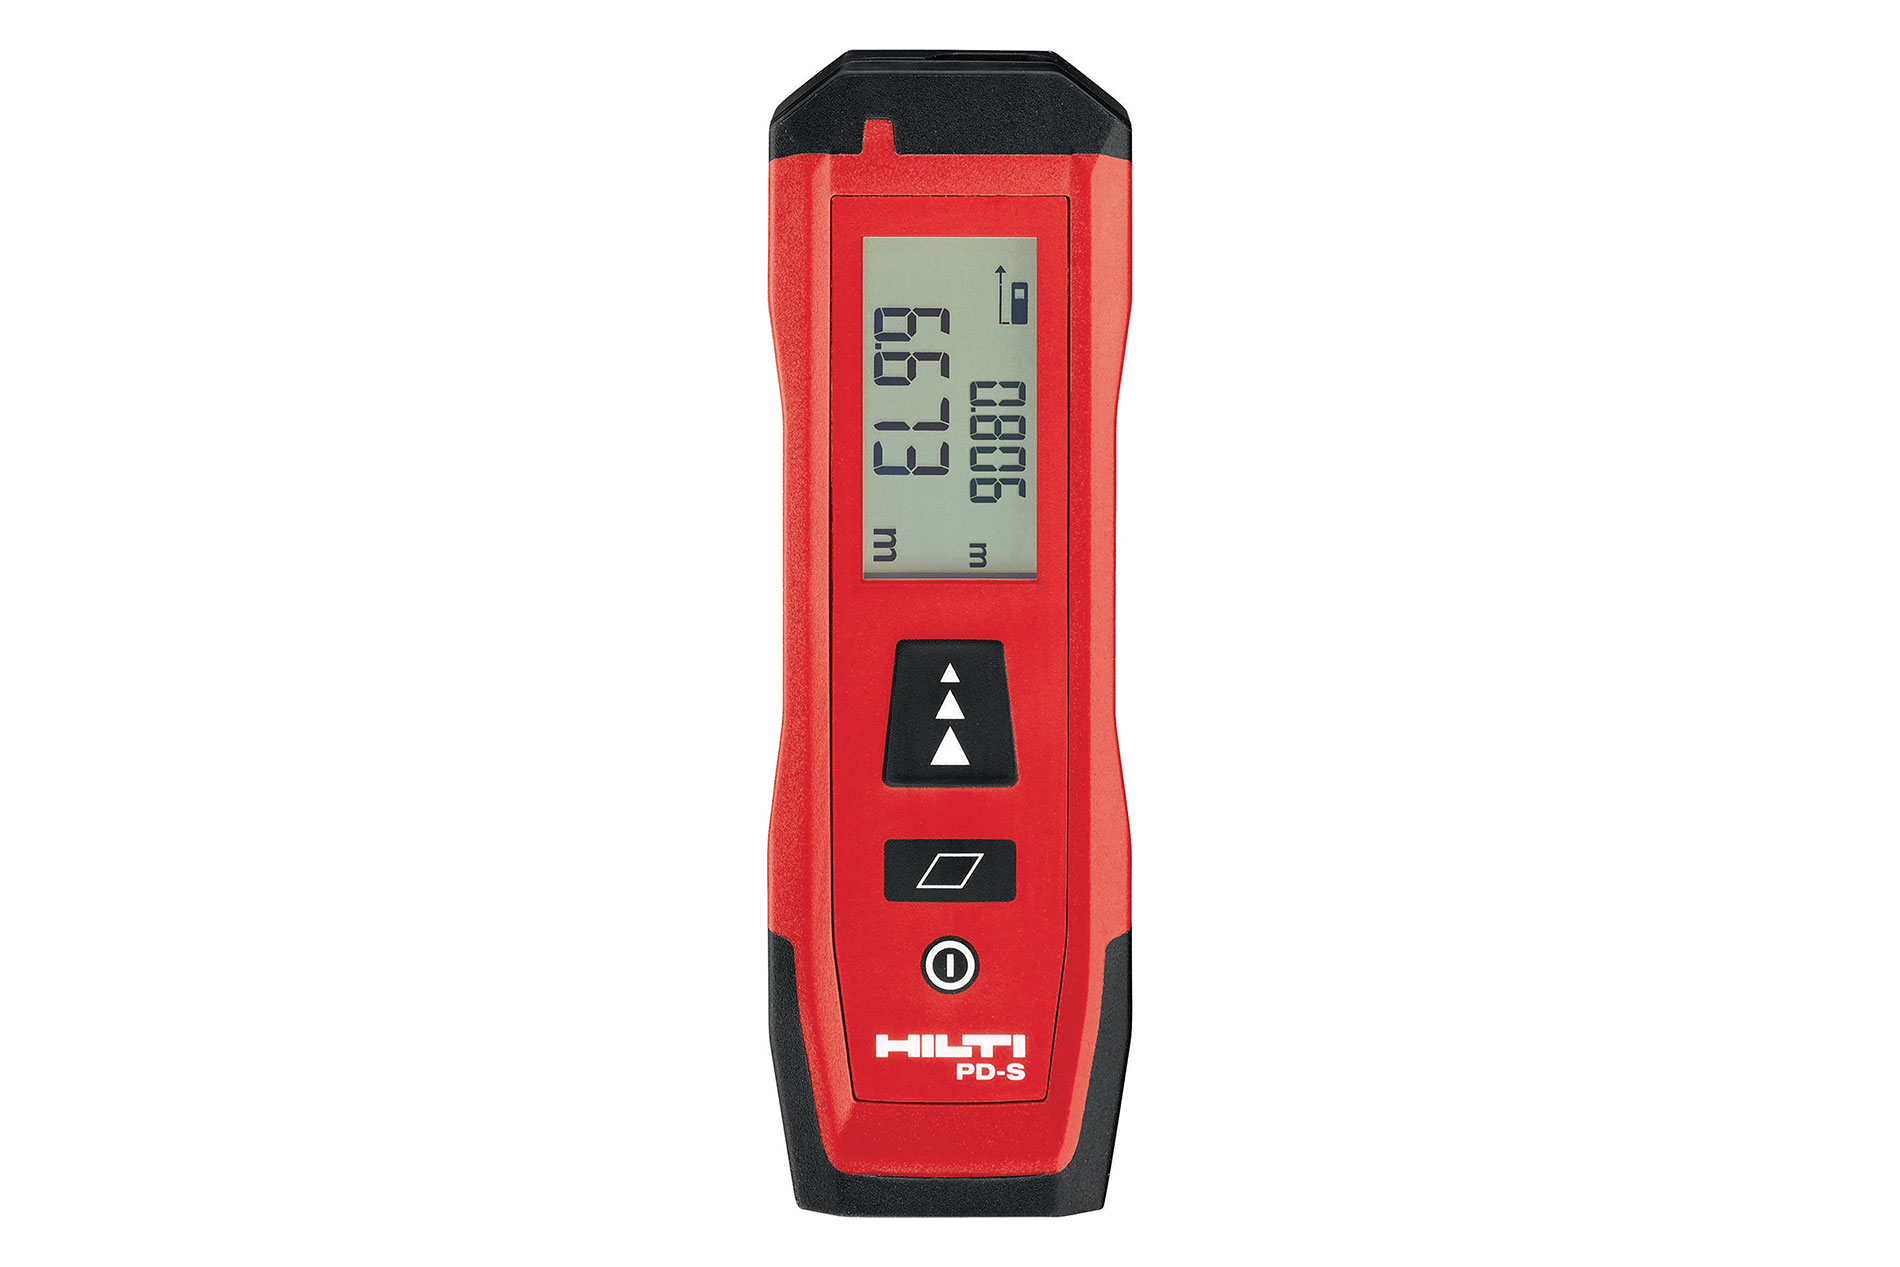 Black and red laser meter with digital screen. Image by Hilti.